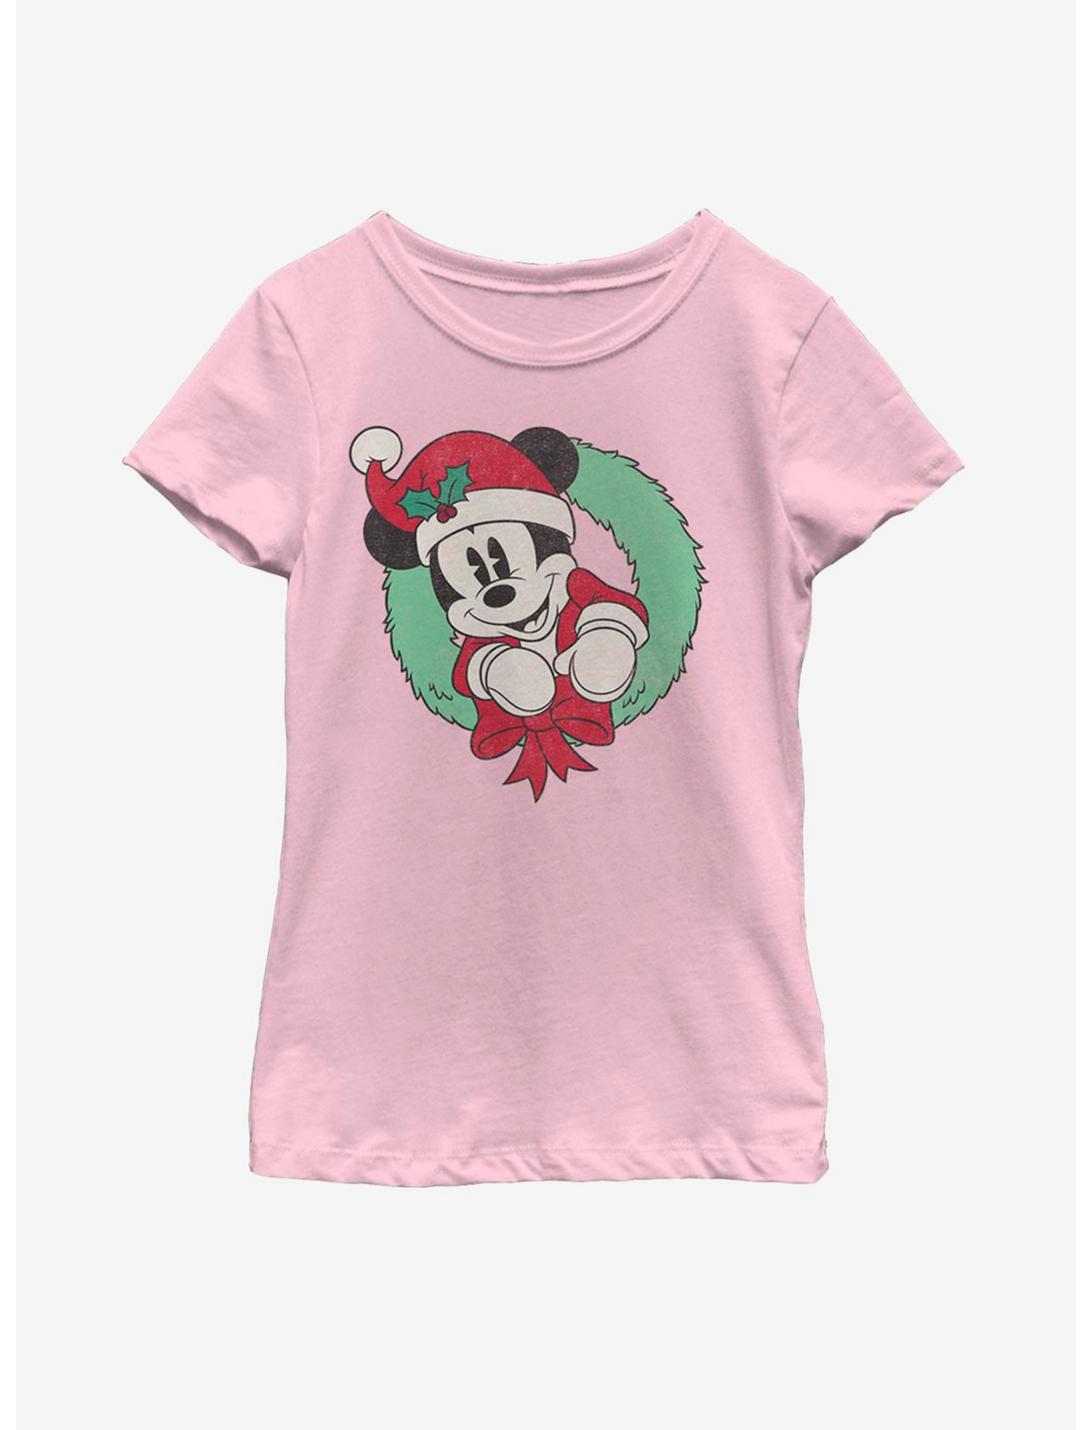 Disney Mickey Mouse Vintage Mickey Wreath Youth Girls T-Shirt, PINK, hi-res